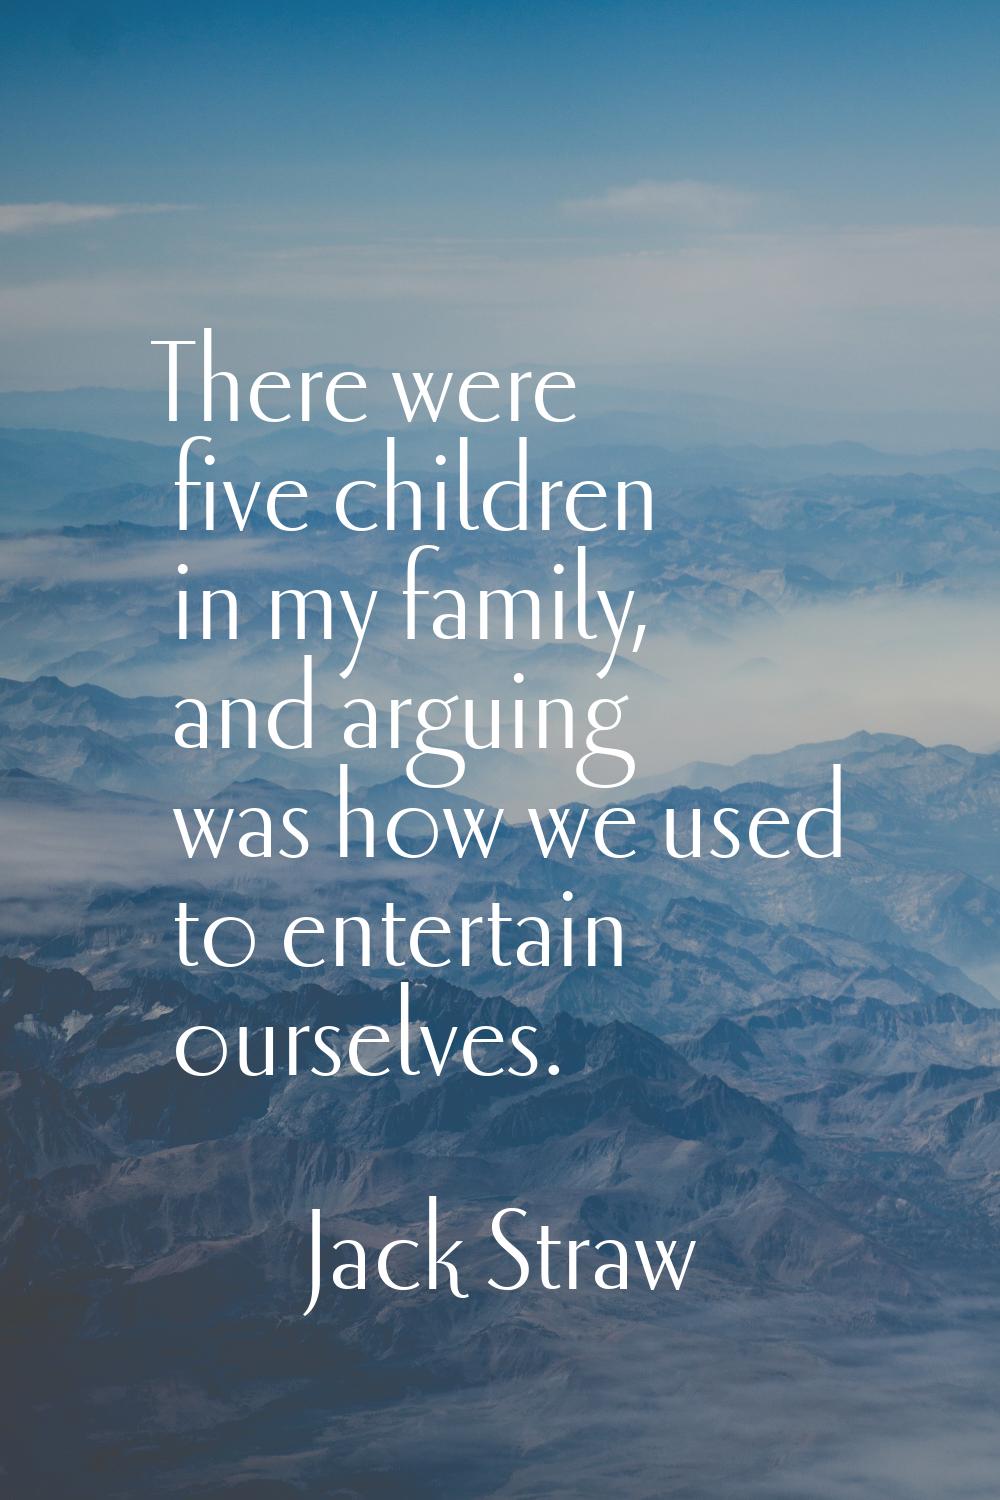 There were five children in my family, and arguing was how we used to entertain ourselves.